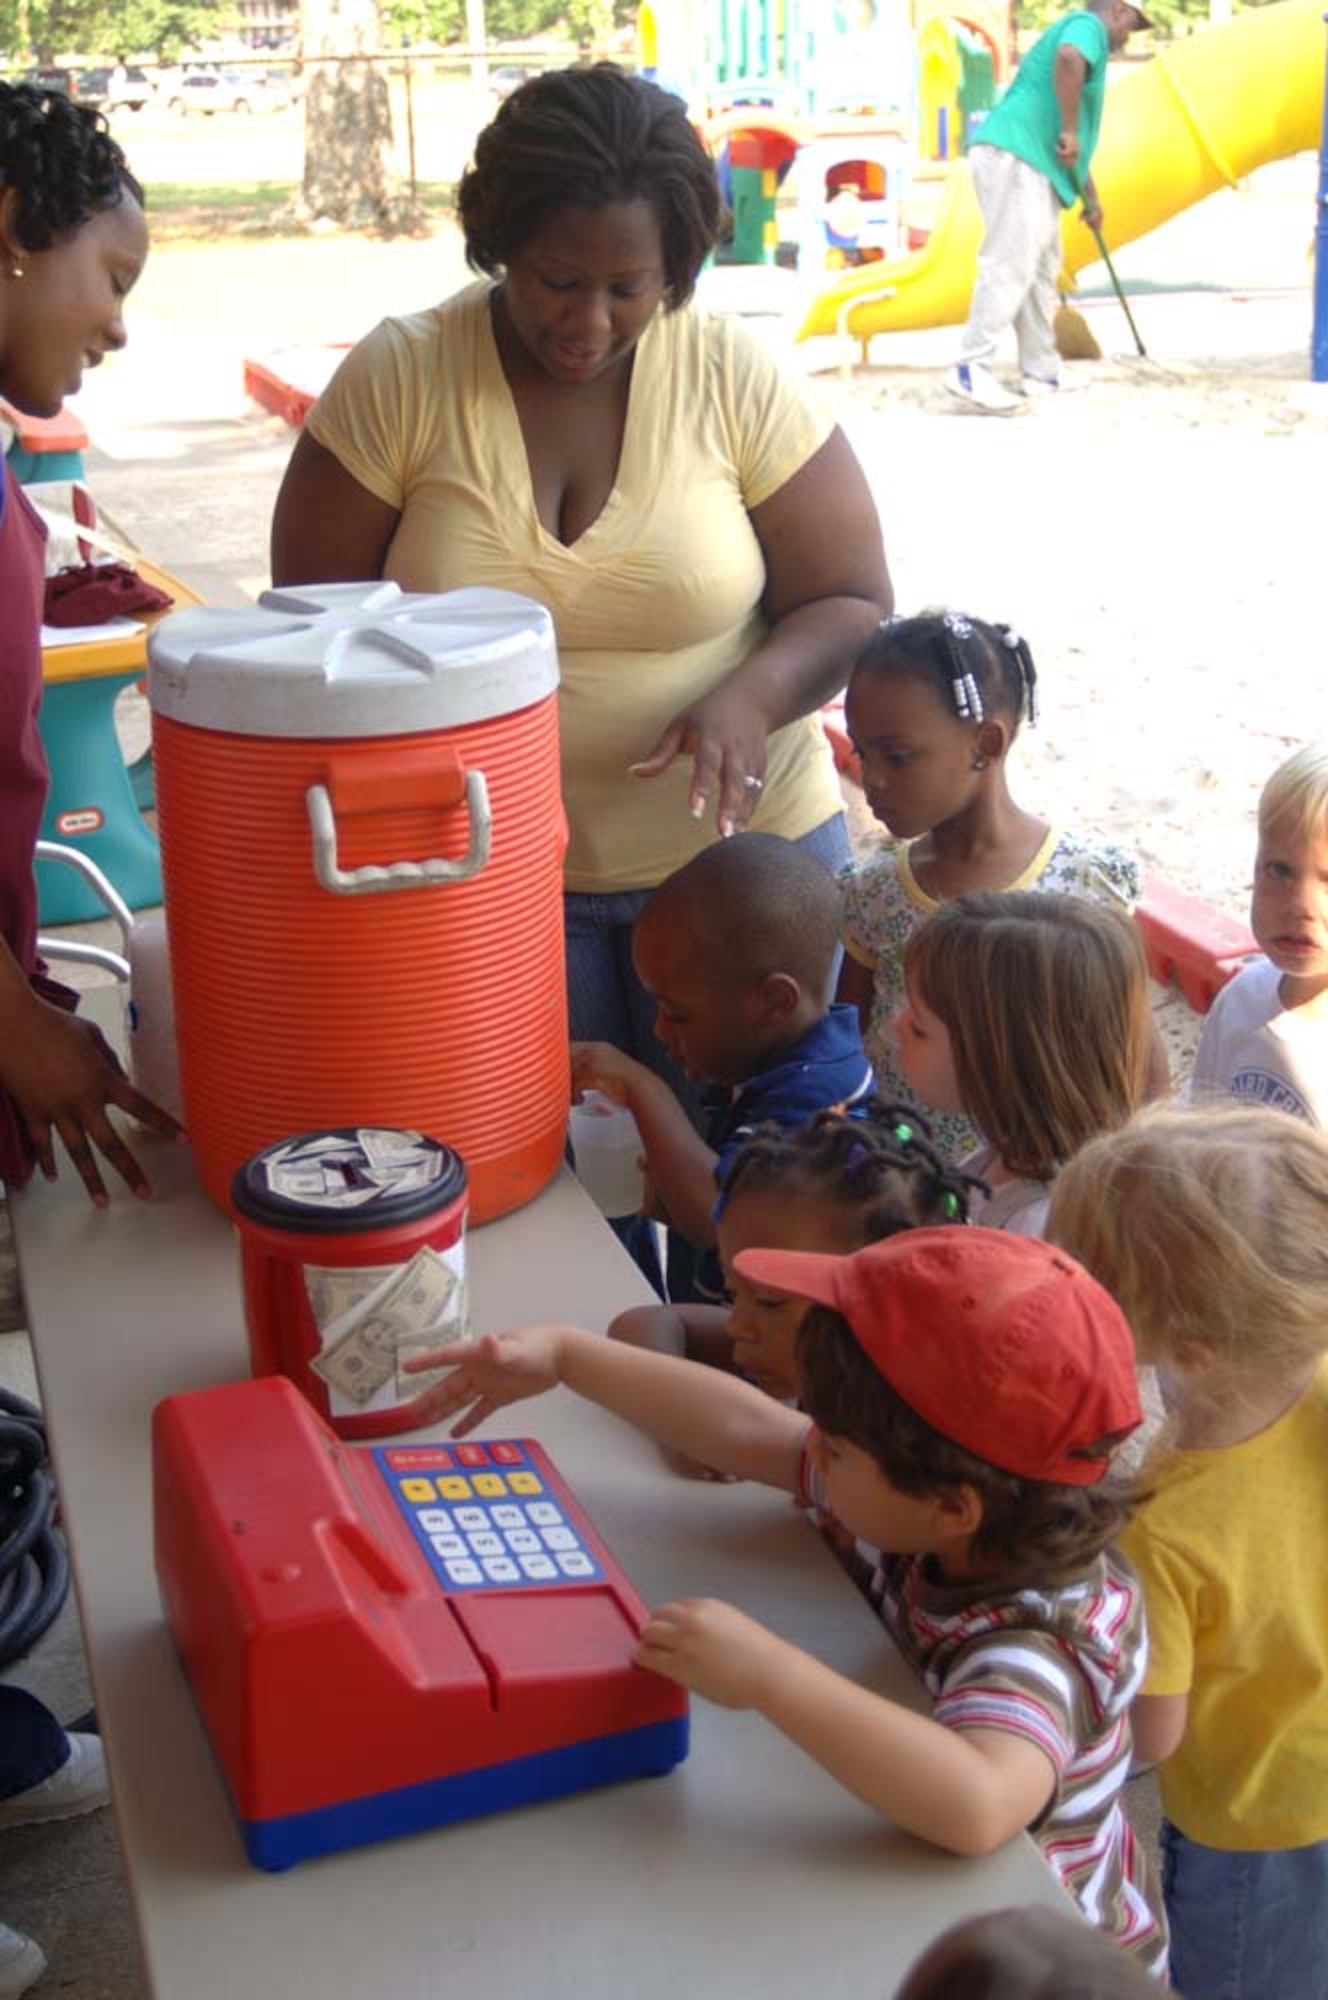 Amaron Brewer pours his mother Kisha Brewer a cup of lemonade Friday at the Child Development Center. The children in Preschool classes 1, 2 and 3 made lemonade to raise money to send phone cards to deployed troops to be able to call home. (U.S. Air Force photo by Airman 1st Class Danielle Powell)